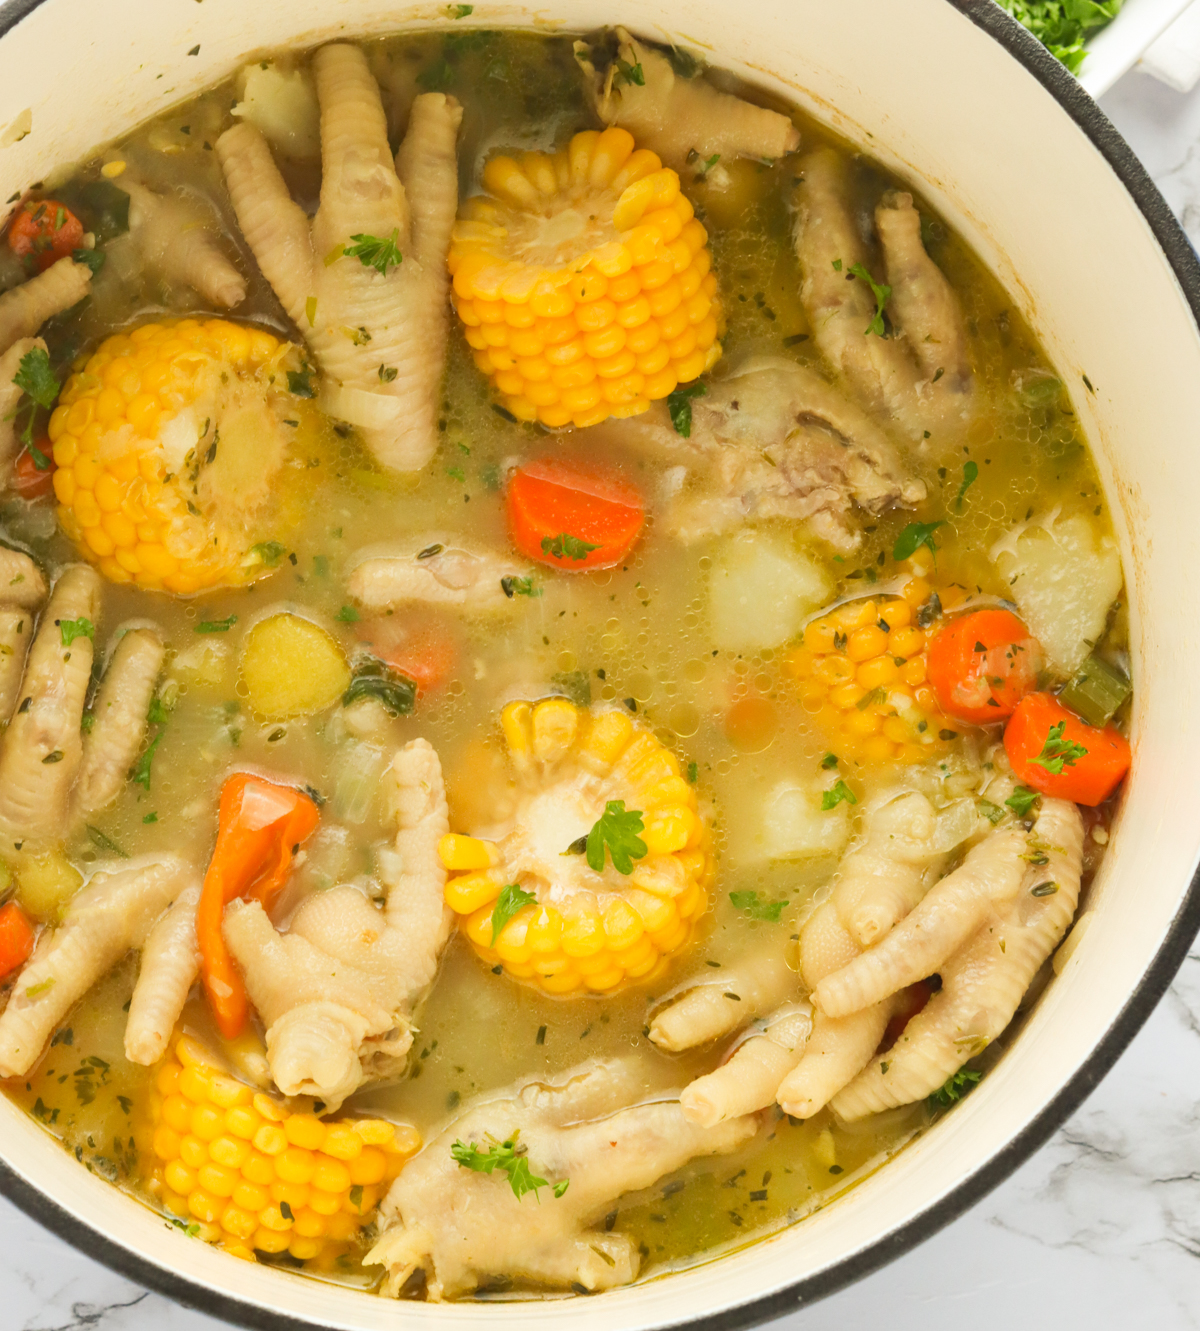 A finished pot of chicken feet soup